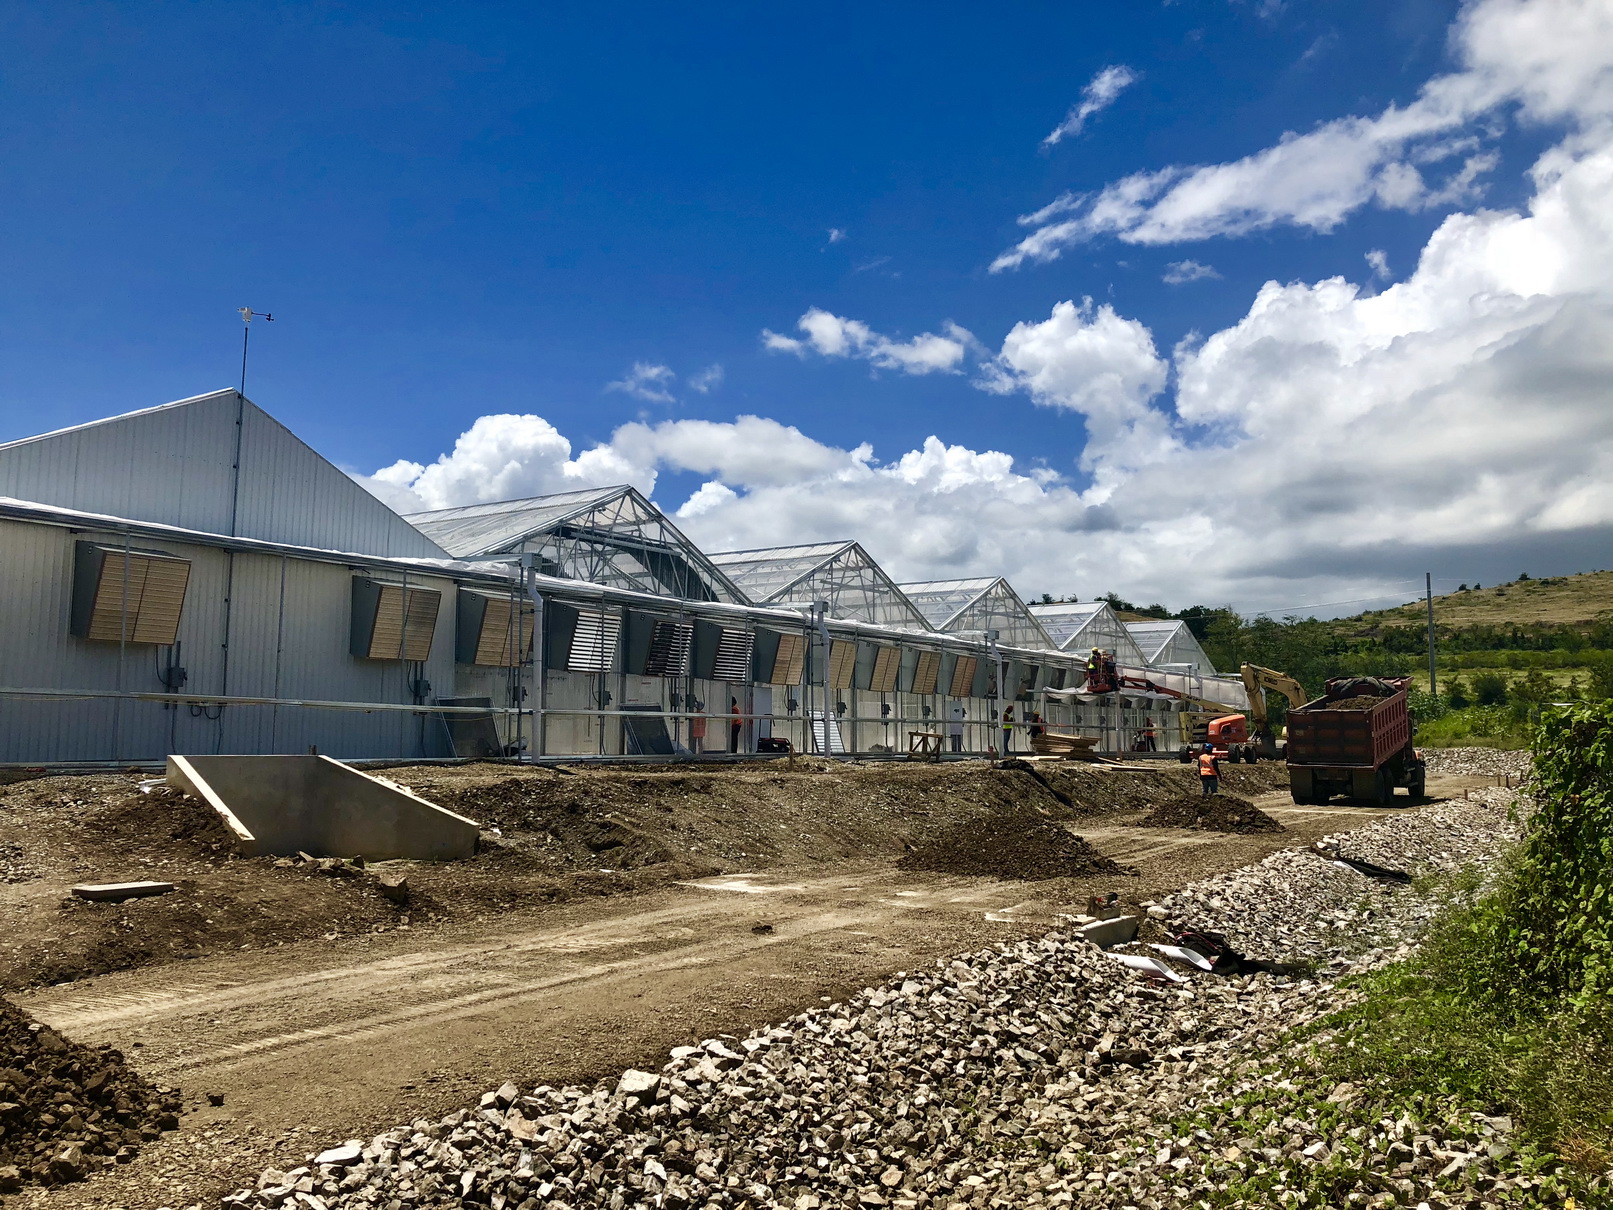 Greenhouse Project in Puerto Rico built between hurricanes | Commercial Greerhouse Manufacturer